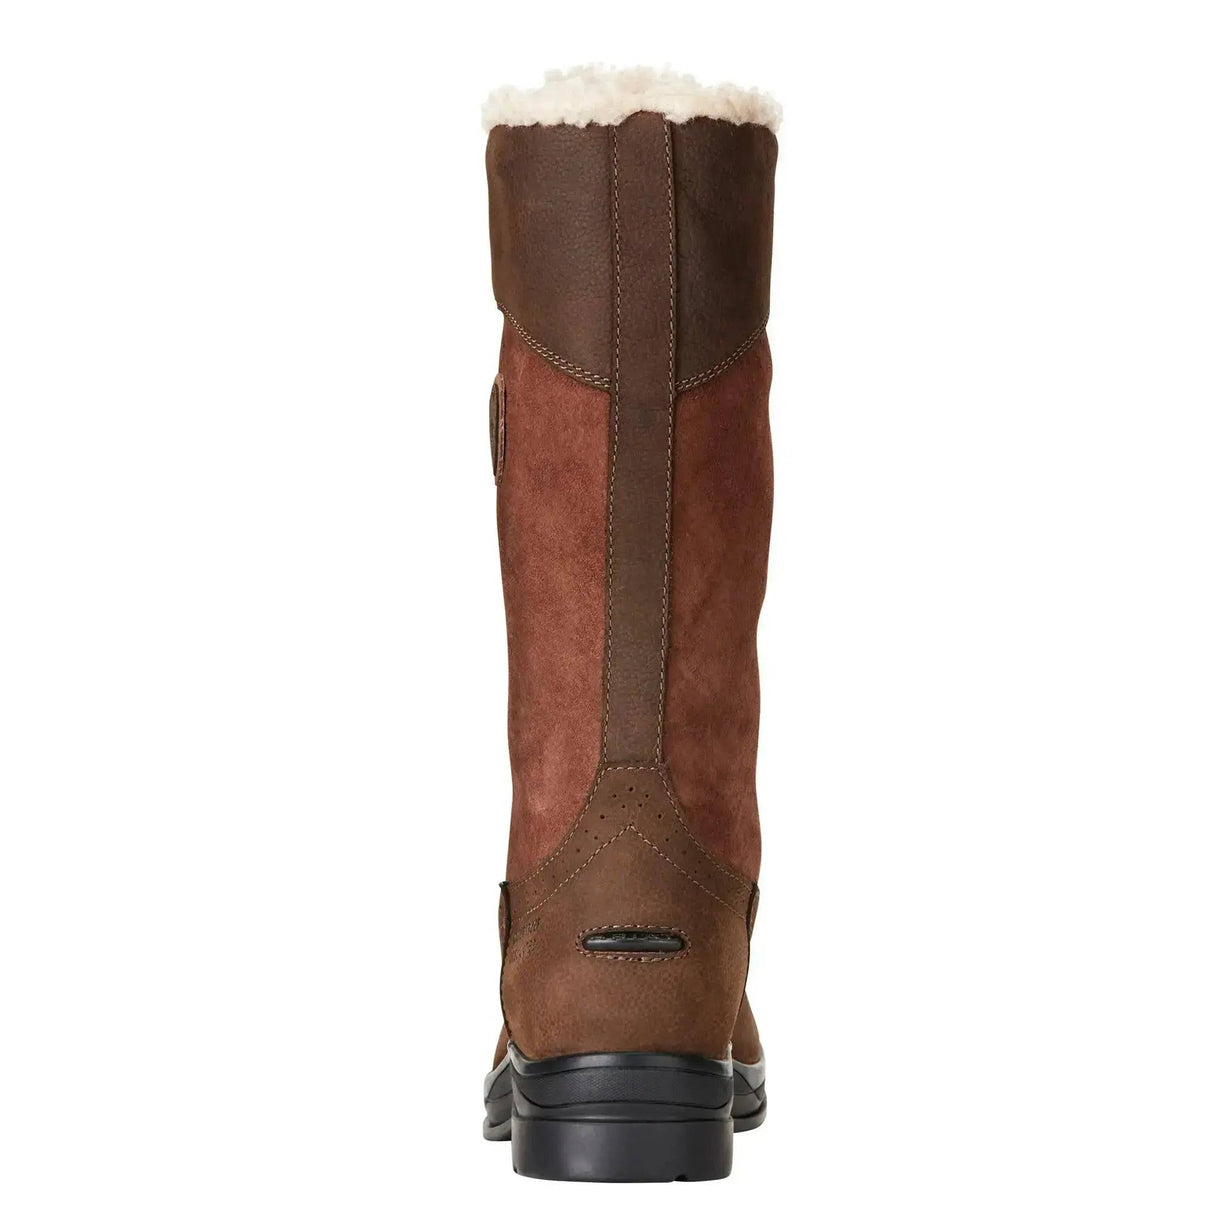 Ariat Wythburn Waterproof Insulated Boot 36 EU / 3 UK Mid Brown Ariat Country Boots Barnstaple Equestrian Supplies